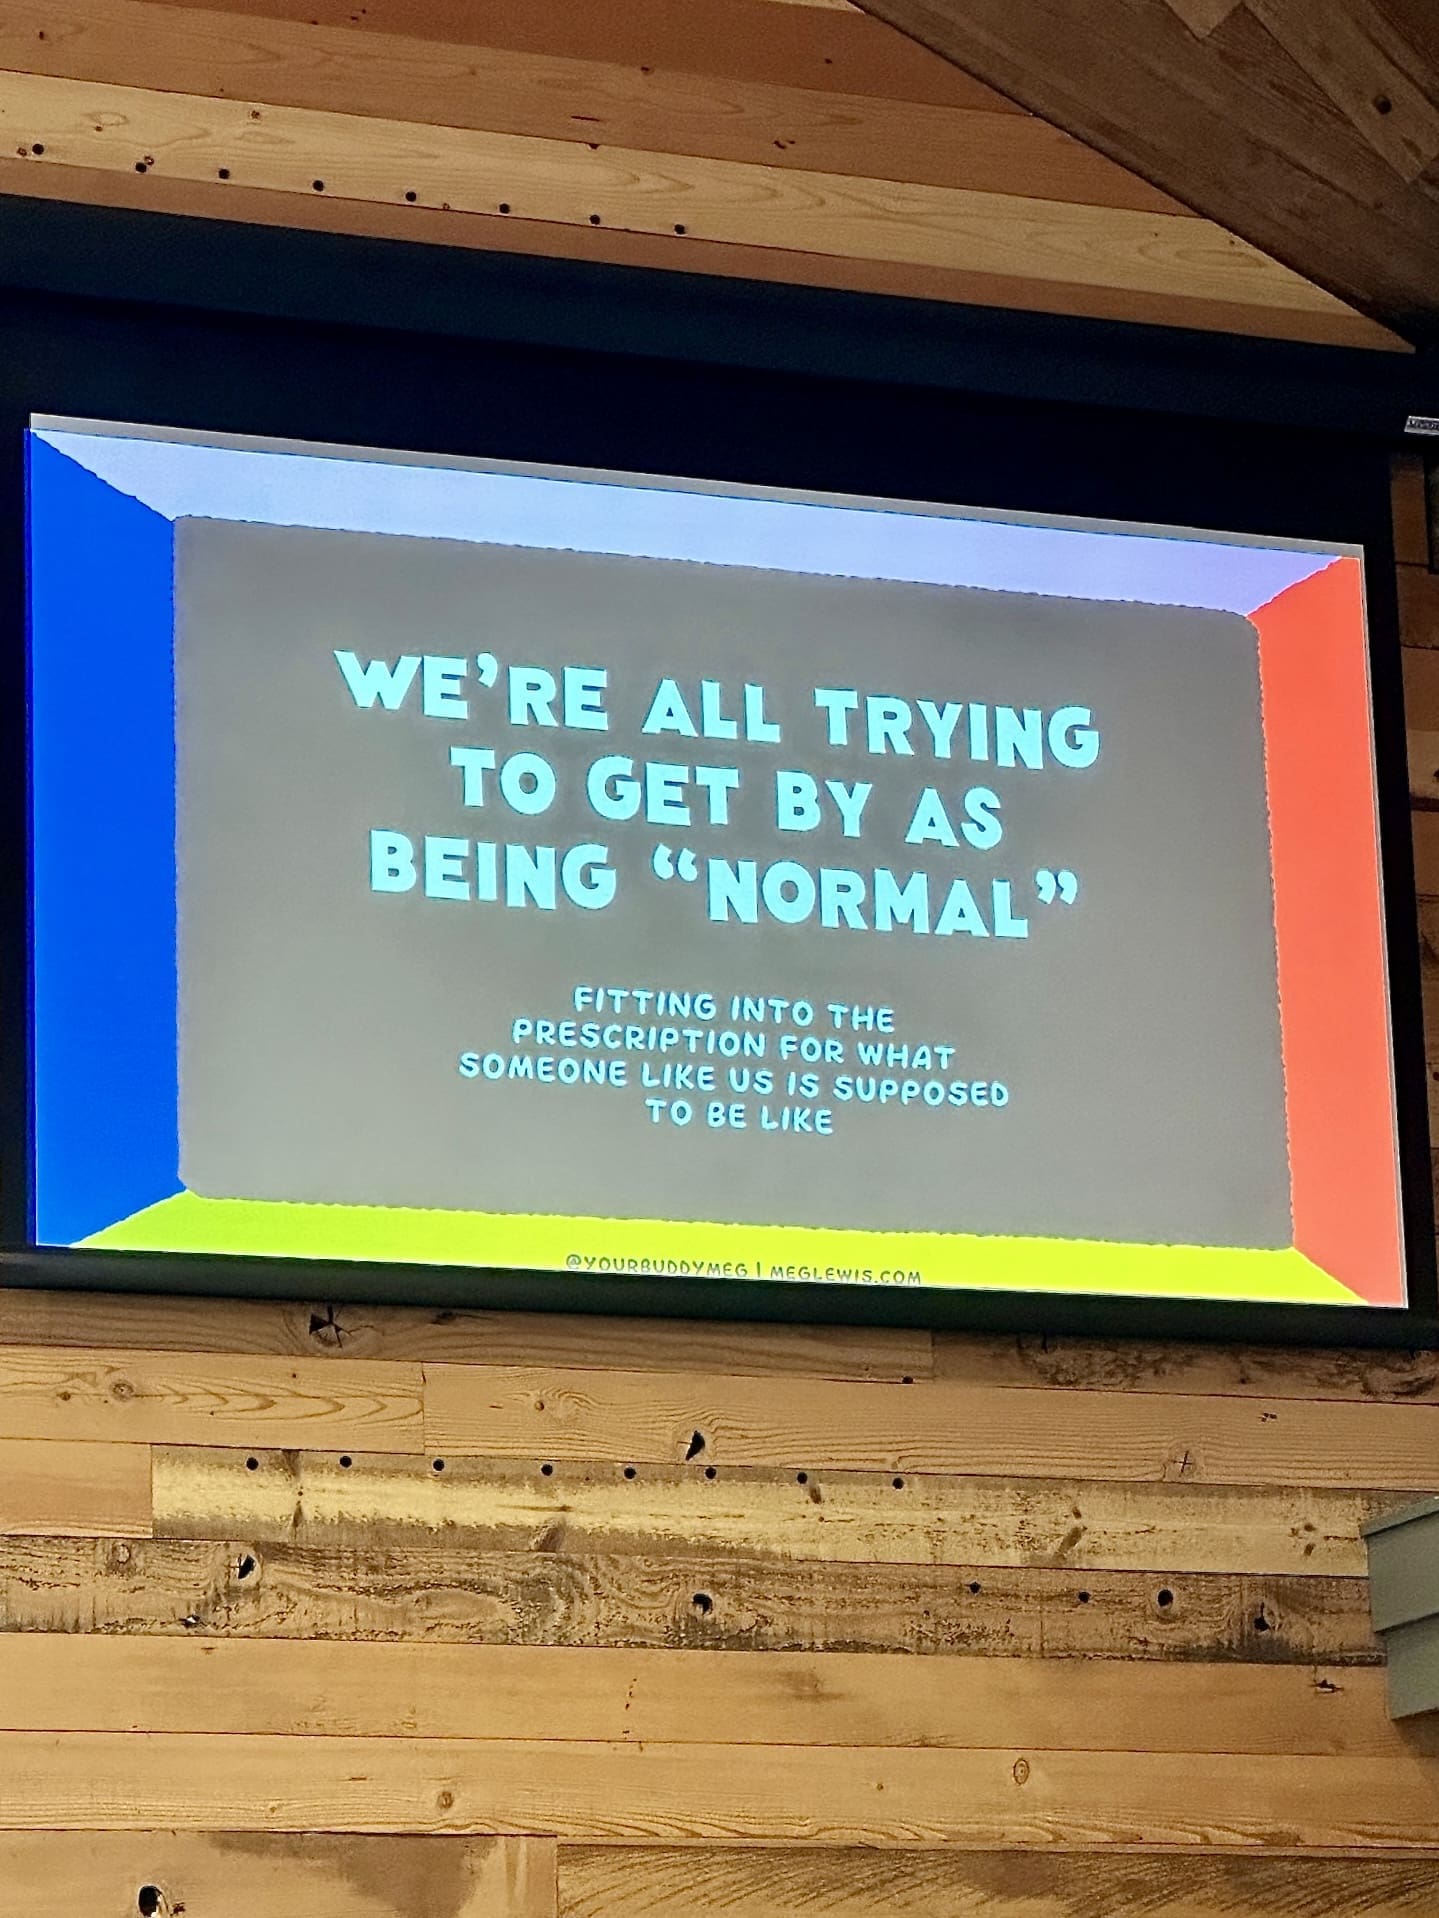 A large, colorful presentation slide projected onto a screen with a wooden beam ceiling above. The slide's background is segmented into bright blue, green, and red sections, with the following text in bold, shadowed letters: 'WE'RE ALL TRYING TO GET BY AS BEING "NORMAL" FITTING INTO THE PRESCRIPTION FOR WHAT SOMEONE LIKE US IS SUPPOSED TO BE LIKE.' Below, in smaller print, are the social media handle '@yourbuddymeg' and the website 'meglewis.com'.